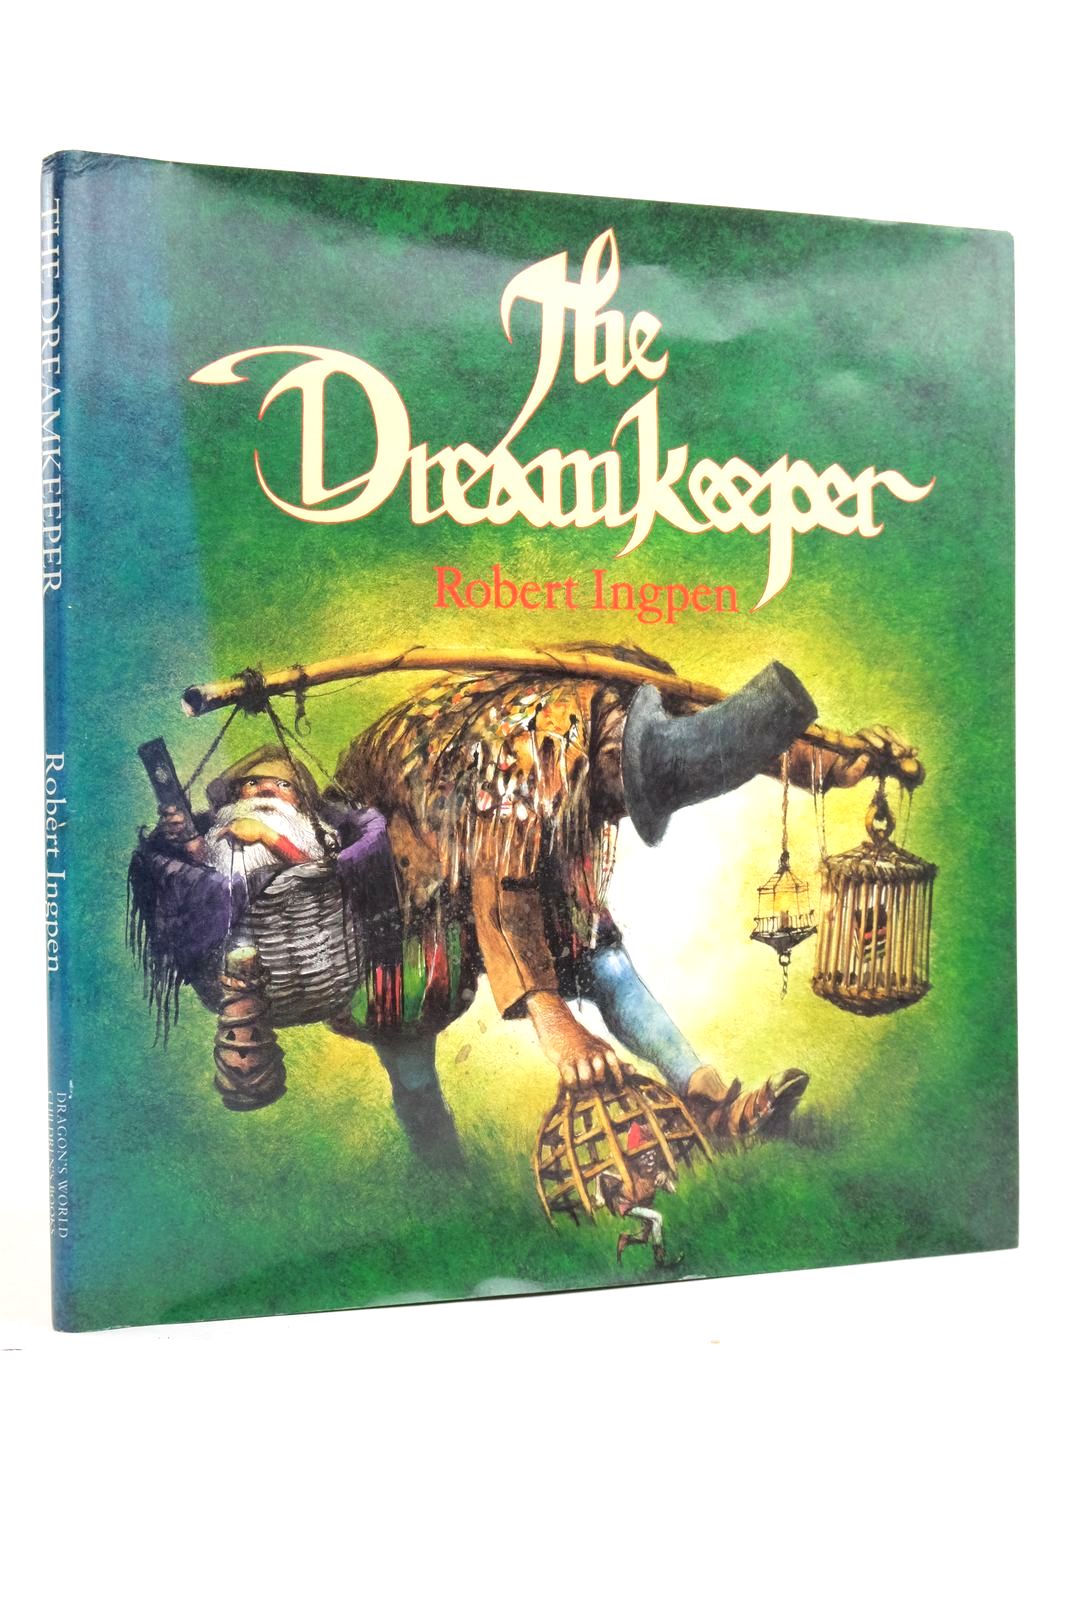 Photo of THE DREAMKEEPER written by Ingpen, Robert illustrated by Ingpen, Robert published by Dragon's World Children's Books (STOCK CODE: 2136014)  for sale by Stella & Rose's Books